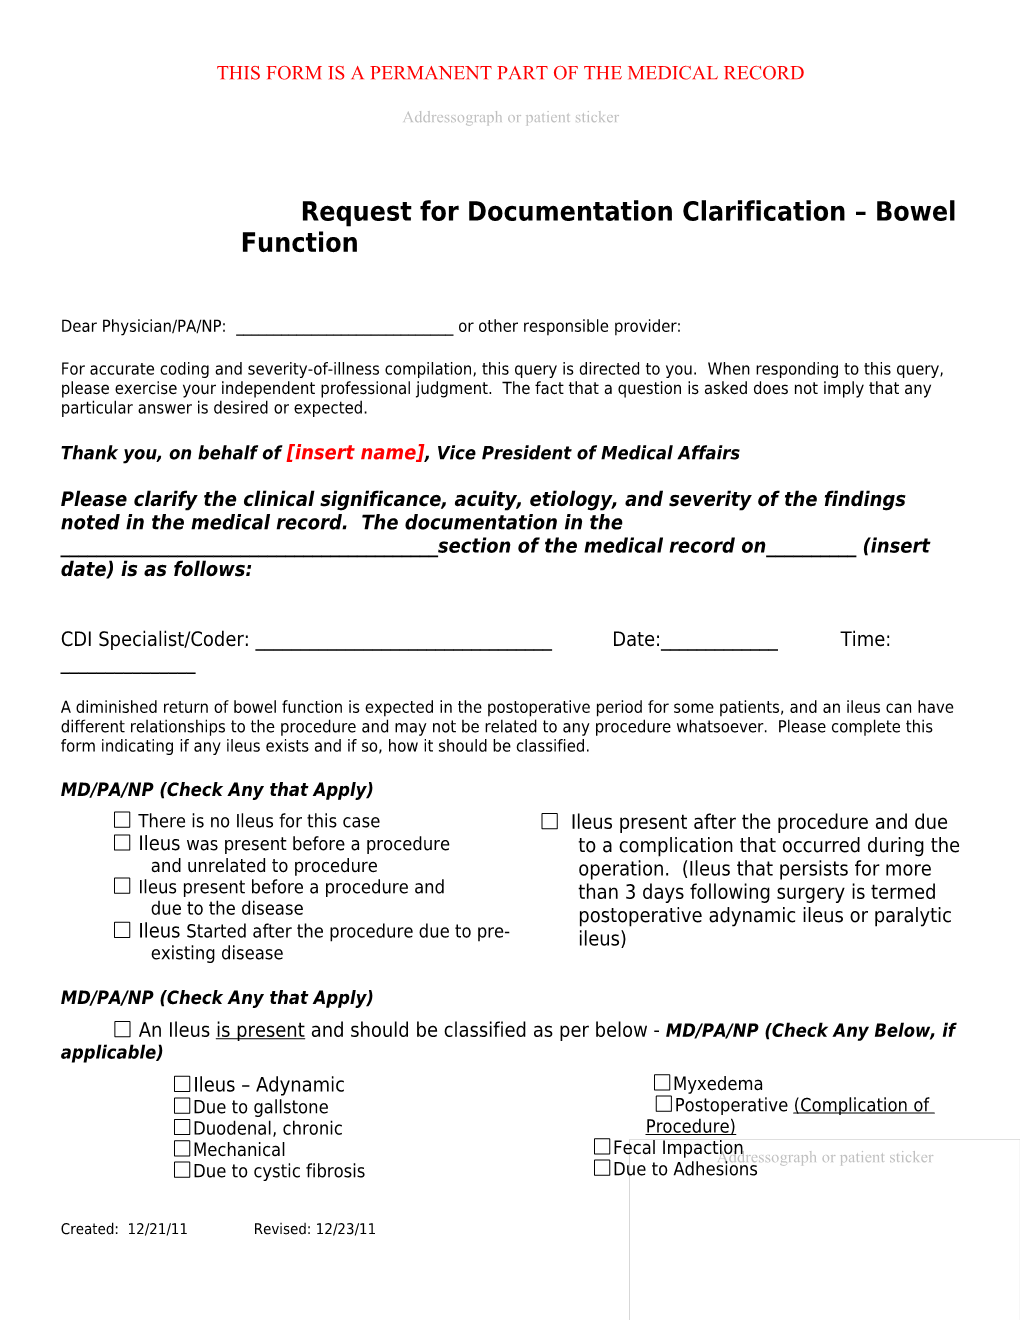 This Form Is a Permanent Part of the Medical Record